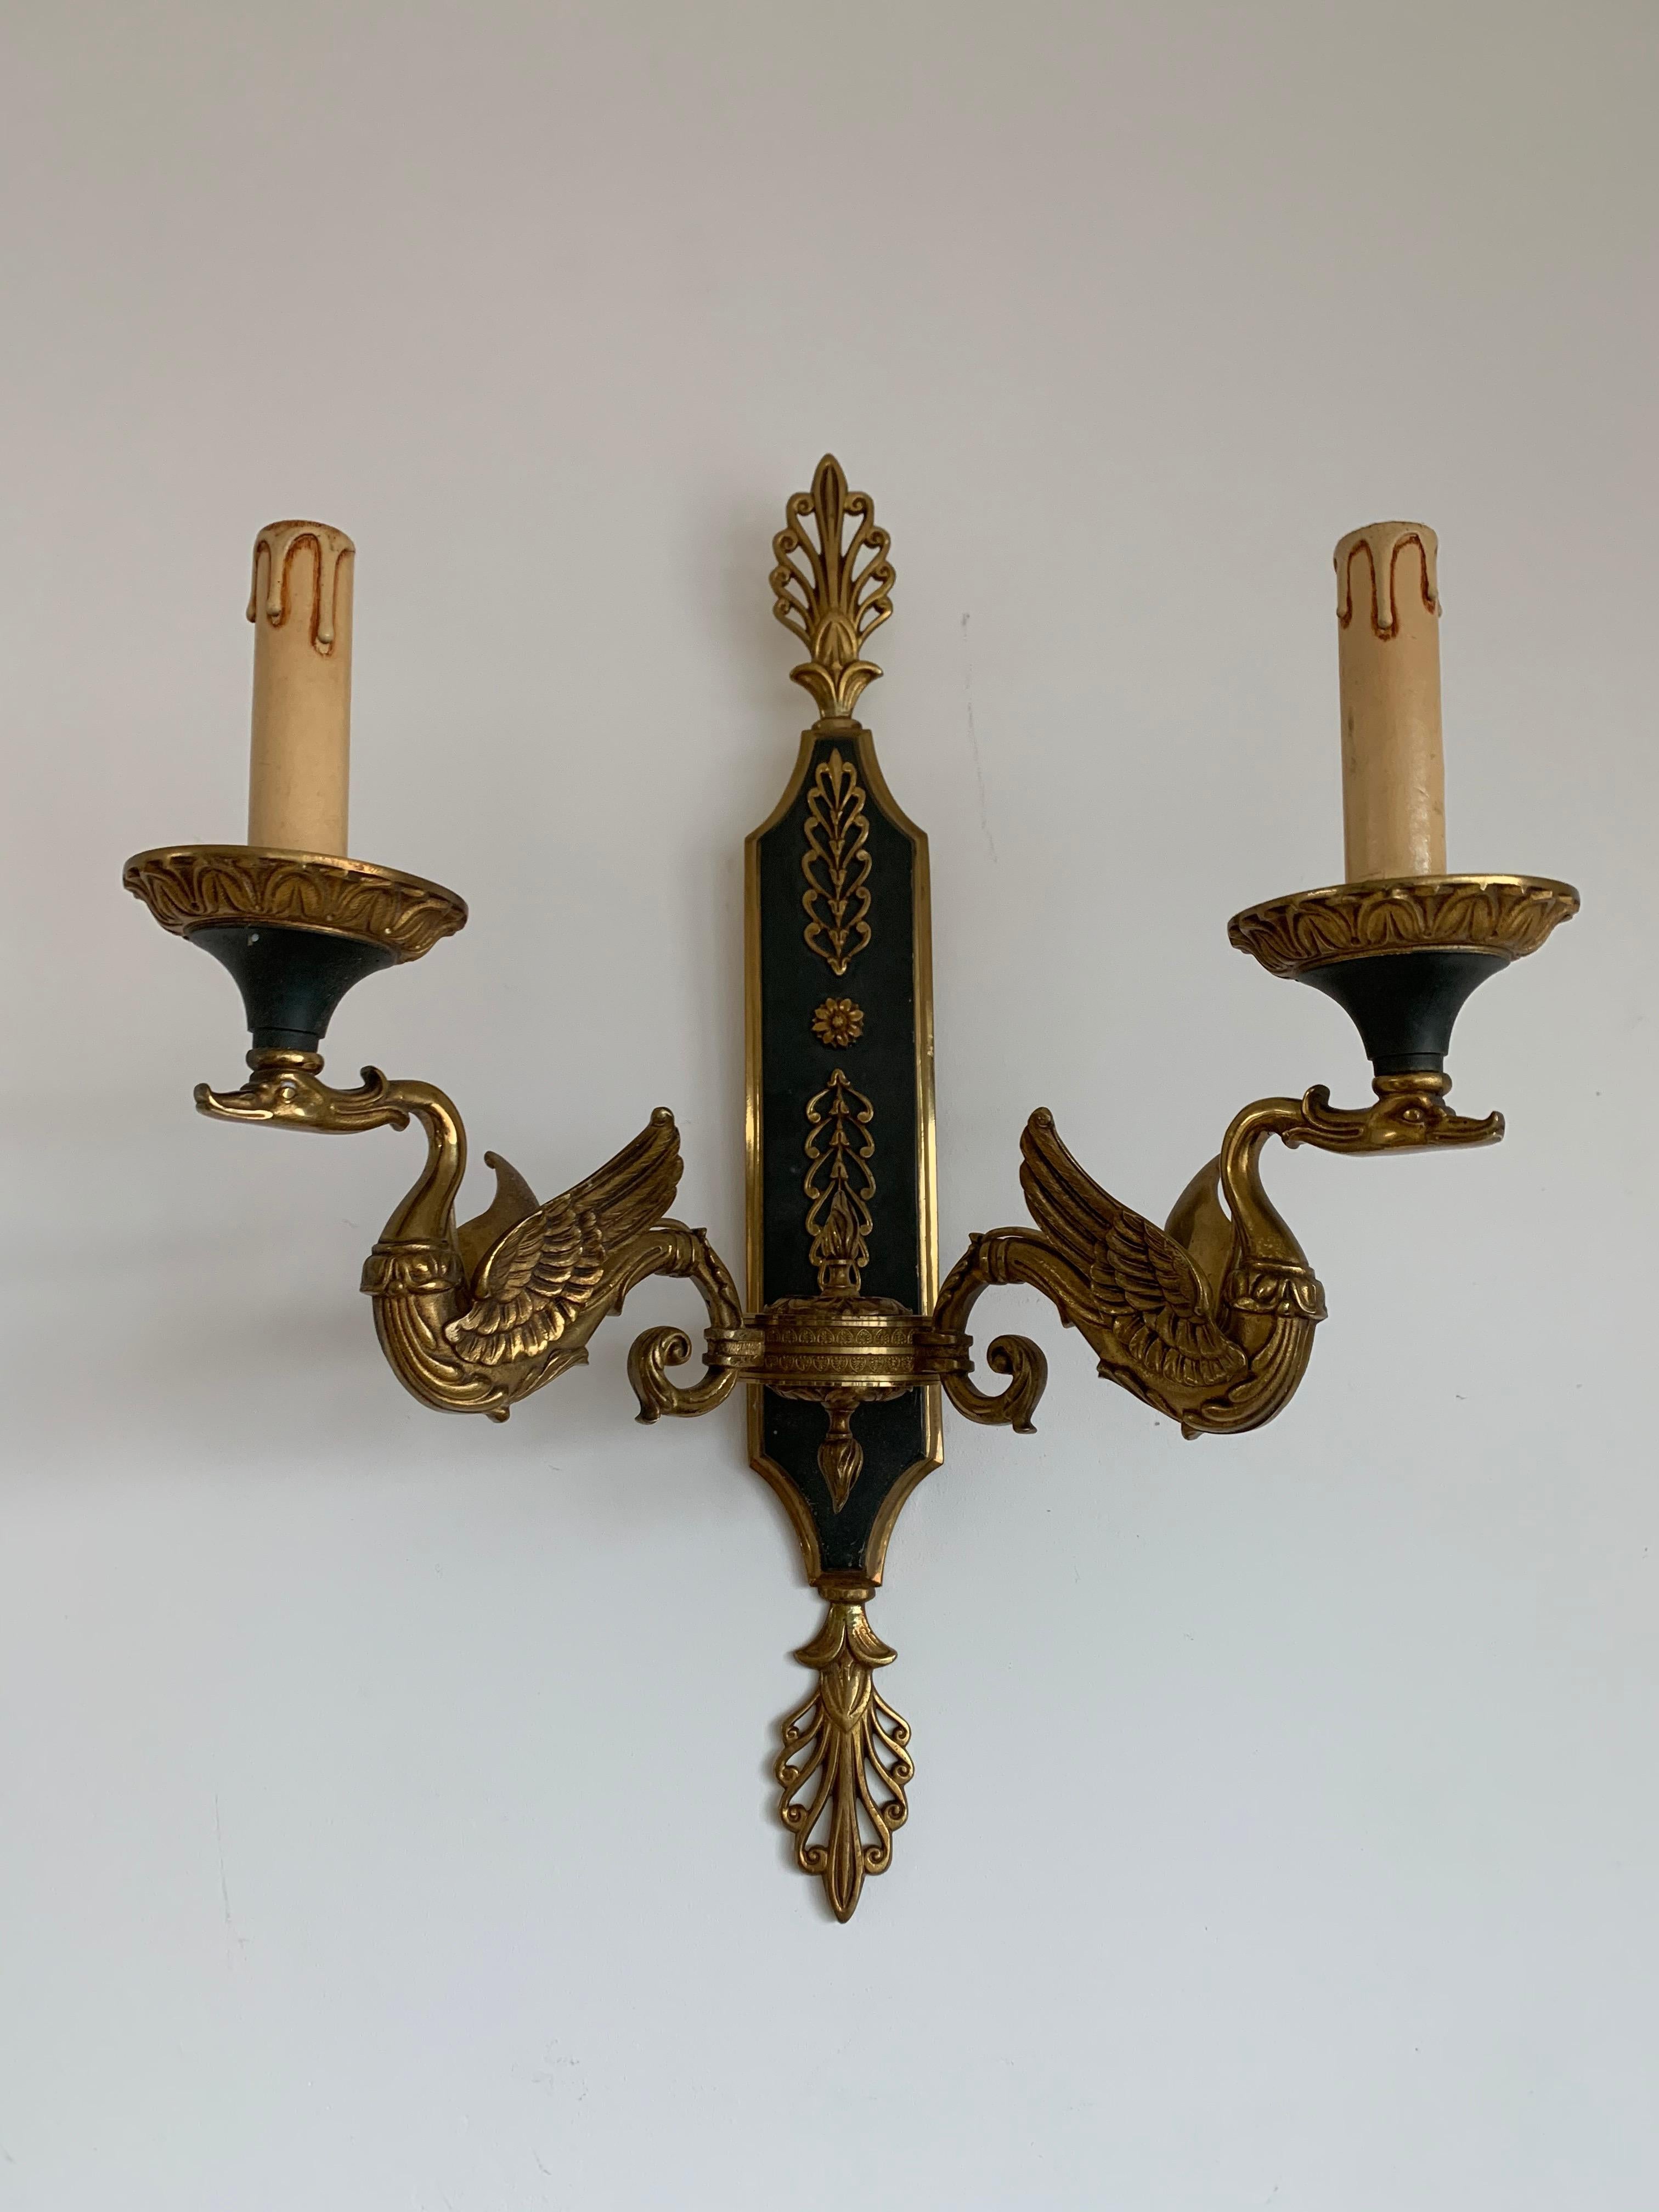 Vintage French Sconces Antique Pair Swan Shaped Wall Lamps